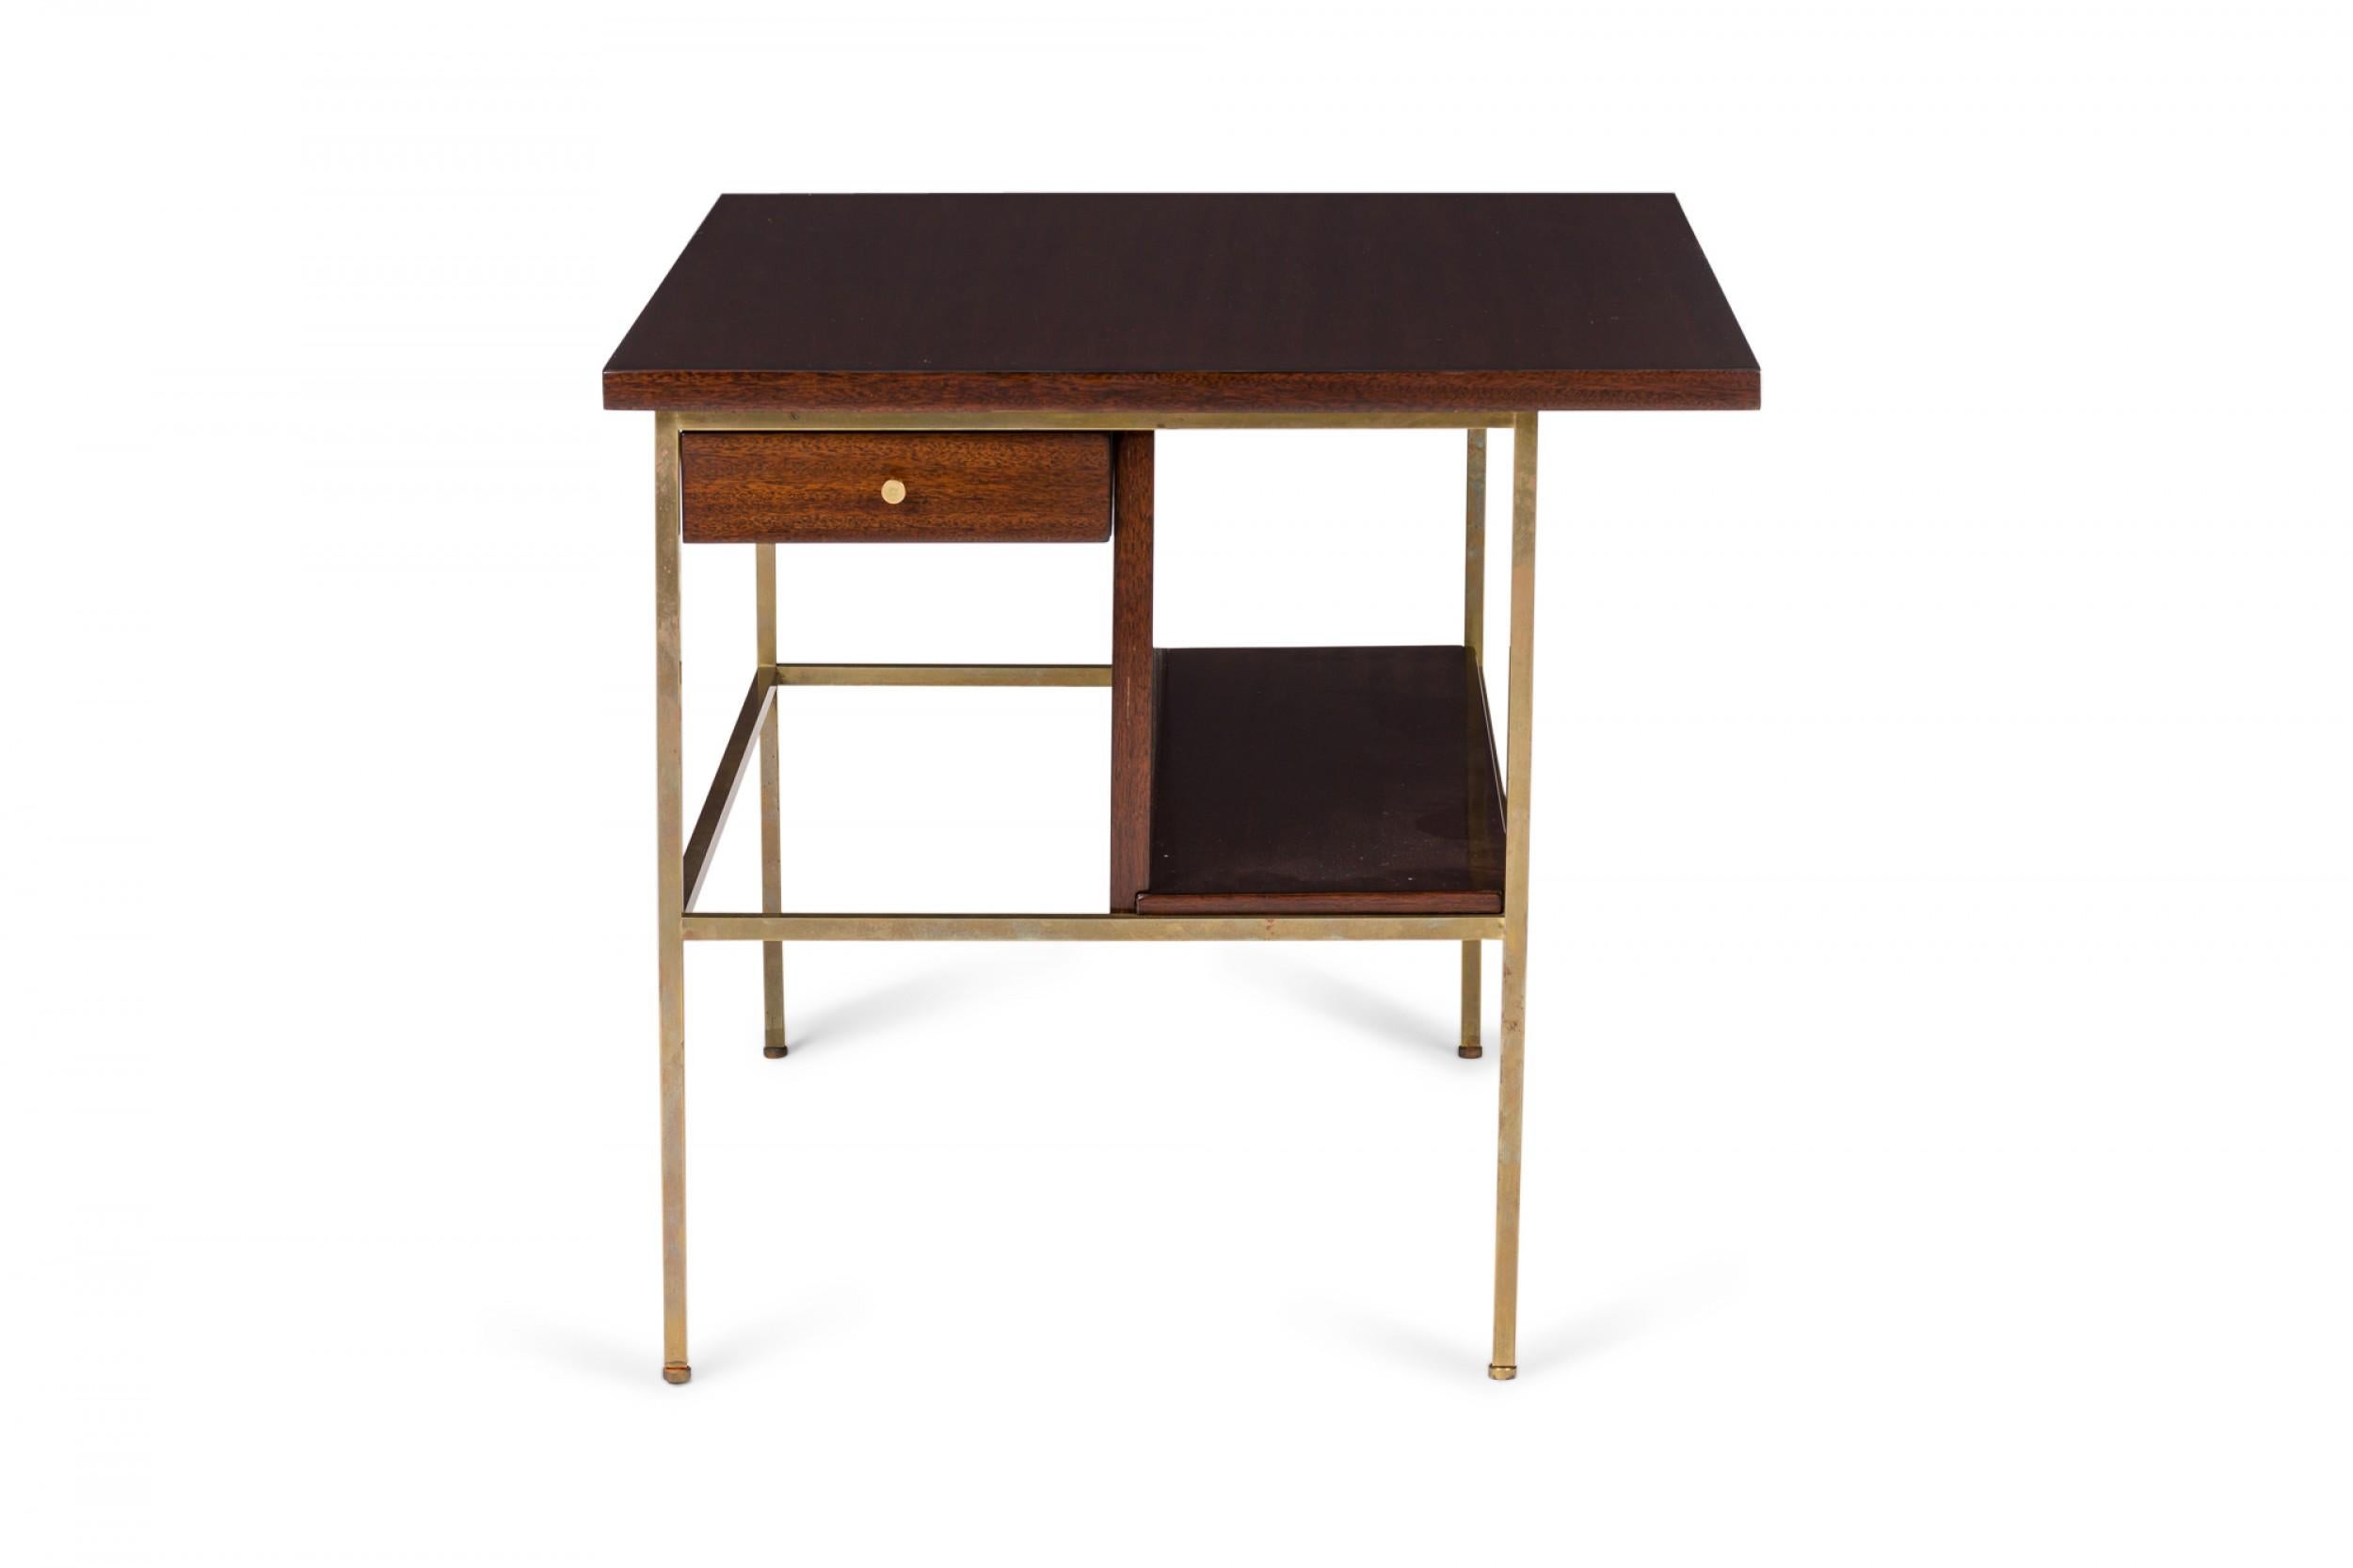 PAIR of American Mid-Century cantilever design end / side tables with rectangular walnut tops above a small drawer with brass drawer pulls, flanked below on the opposite side by an open shelf, supported by a brass frame with rectangular stretcher